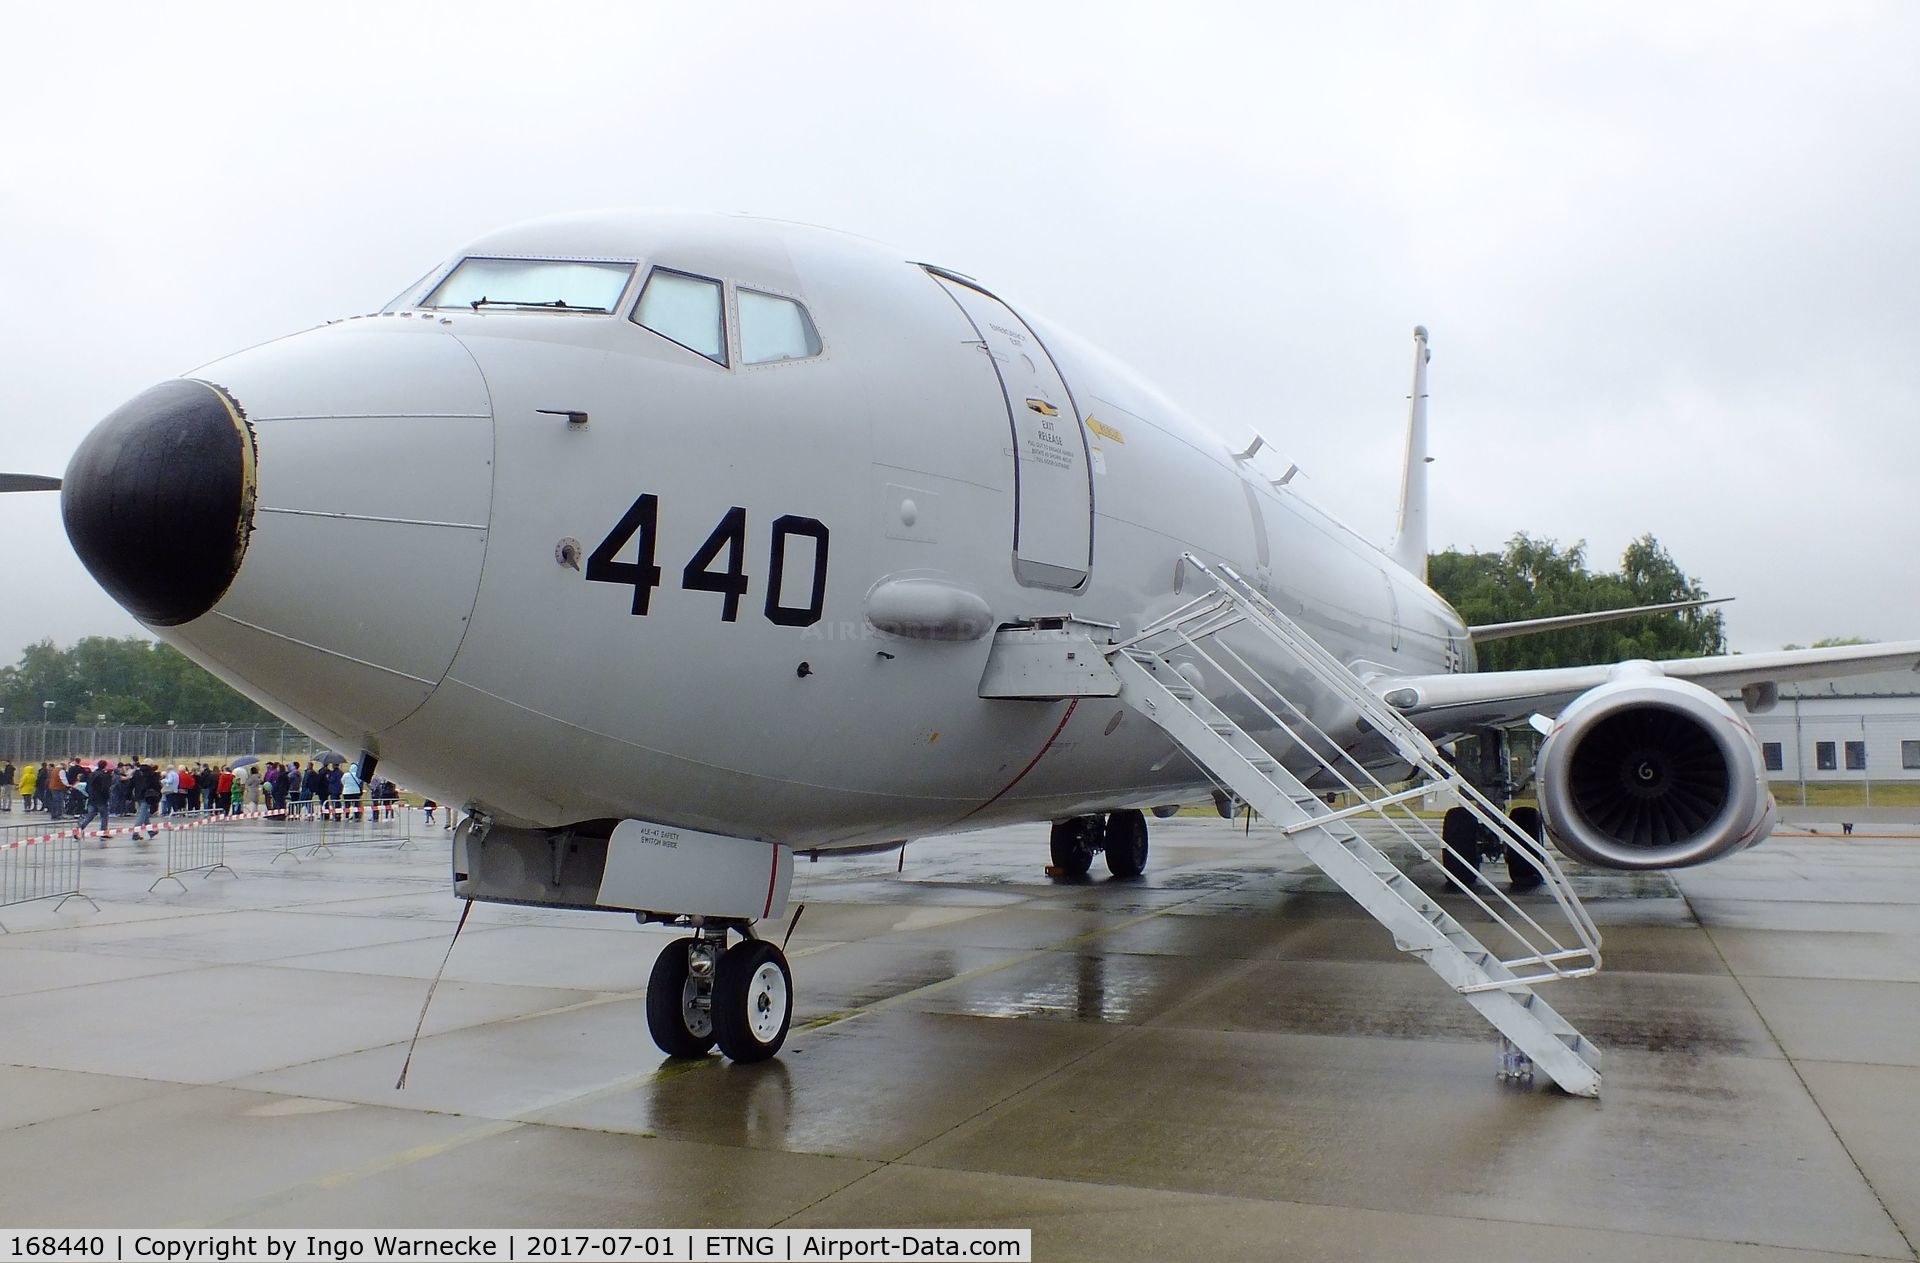 168440, 2013 Boeing P-8A Poseidon C/N 40820/4366, Boeing P-8A Poseidon of the USN at the NAEWF 35 years jubilee display Geilenkirchen 2017